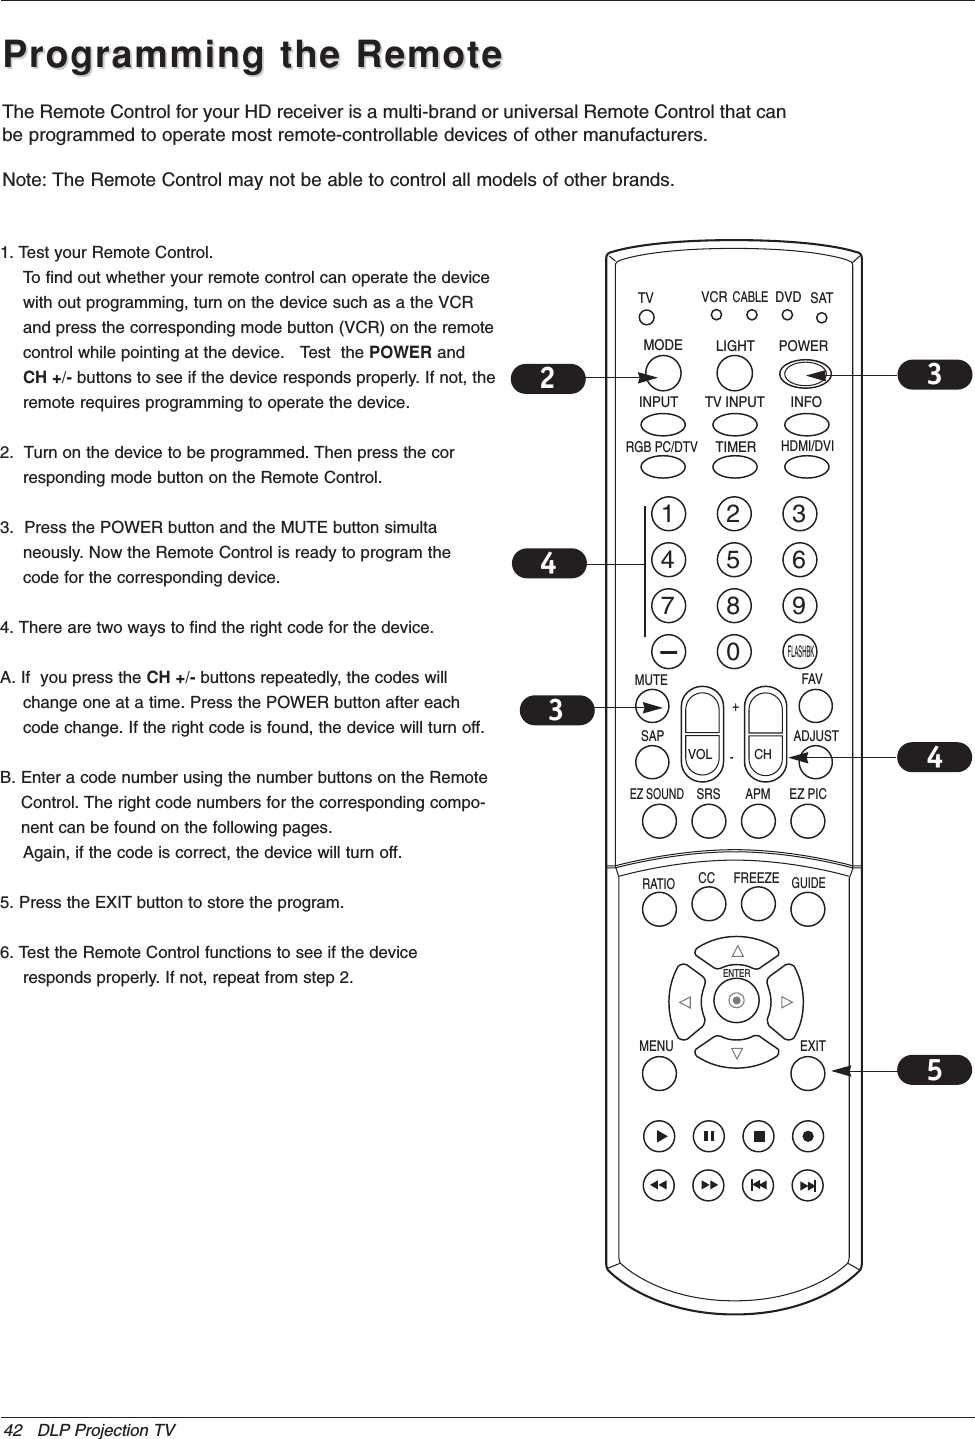 42 DLP Projection TVProgramming the RemoteProgramming the Remote1. Test your Remote Control.To find out whether your remote control can operate the device with out programming, turn on the device such as a the VCR and press the corresponding mode button (VCR) on the remote control while pointing at the device.  Test  the POWER and  CH +/- buttons to see if the device responds properly. If not, the remote requires programming to operate the device.2.  Turn on the device to be programmed. Then press the corresponding mode button on the Remote Control.3.  Press the POWER button and the MUTE button simultaneously. Now the Remote Control is ready to program the code for the corresponding device.4. There are two ways to find the right code for the device.A. If  you press the CH +/- buttons repeatedly, the codes will change one at a time. Press the POWER button after each code change. If the right code is found, the device will turn off.B. Enter a code number using the number buttons on the RemoteControl. The right code numbers for the corresponding compo-nent can be found on the following pages.Again, if the code is correct, the device will turn off.5. Press the EXIT button to store the program.6. Test the Remote Control functions to see if the device responds properly. If not, repeat from step 2.1 2 34 5 67 8 90TVMODE LIGHT POWER   INPUT INFOHDMI/DVIVCRCABLEDVD SATMUTEEZ PICSRS APMEZ SOUNDRATIOMENU EXITCC FREEZEGUIDEVOL CHFAVSAP ADJUSTTIMERRGB PC/DTVTV INPUTFLASHBK  +-ENTER24534The Remote Control for your HD receiver is a multi-brand or universal Remote Control that canbe programmed to operate most remote-controllable devices of other manufacturers.Note: The Remote Control may not be able to control all models of other brands.3